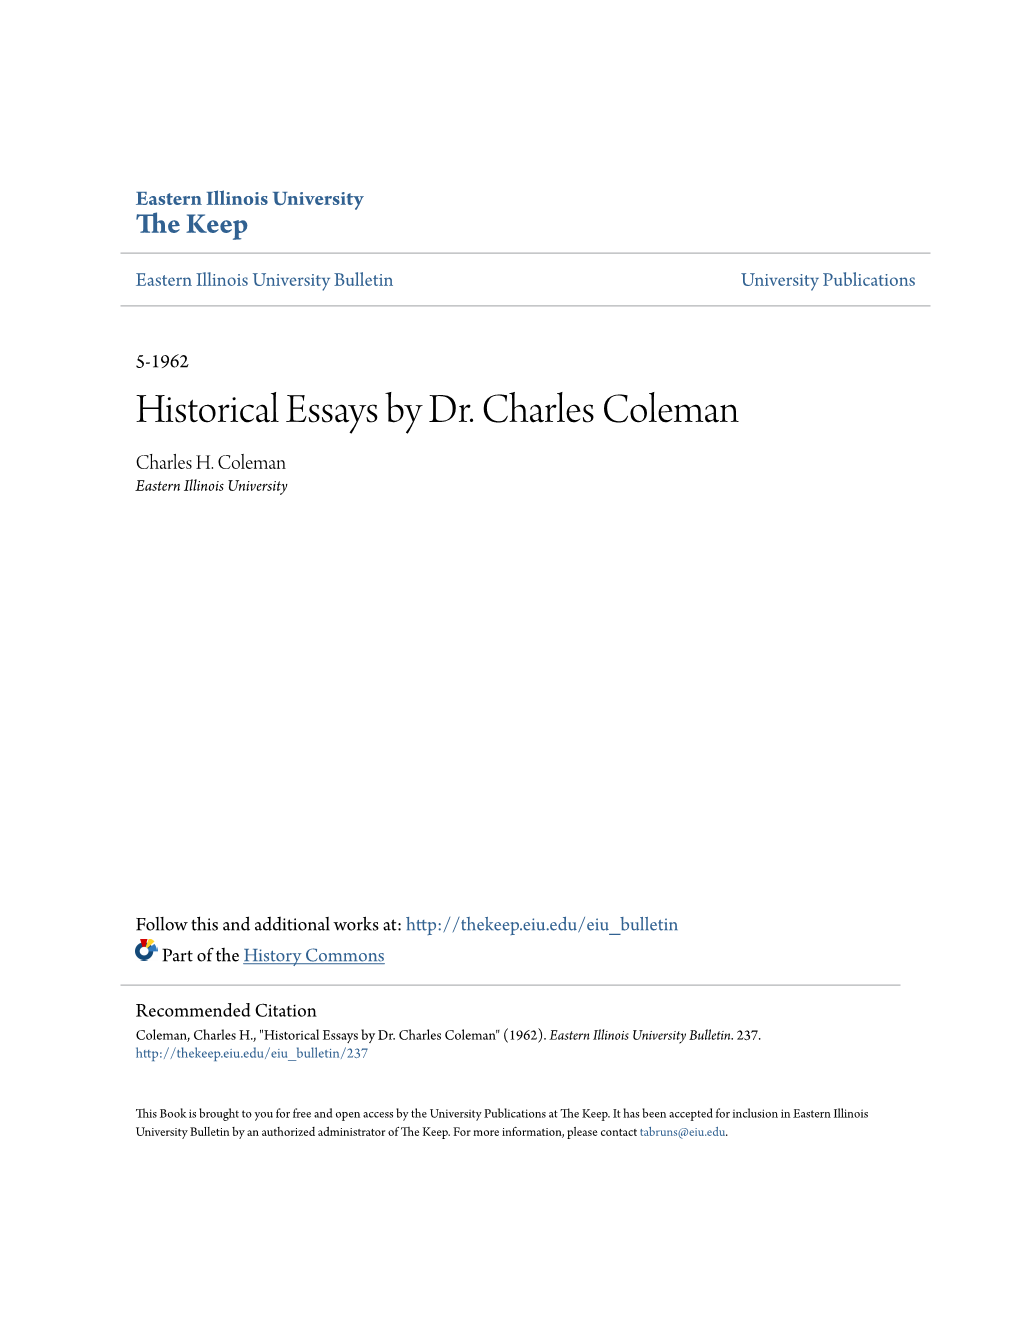 Historical Essays by Dr. Charles Coleman Charles H